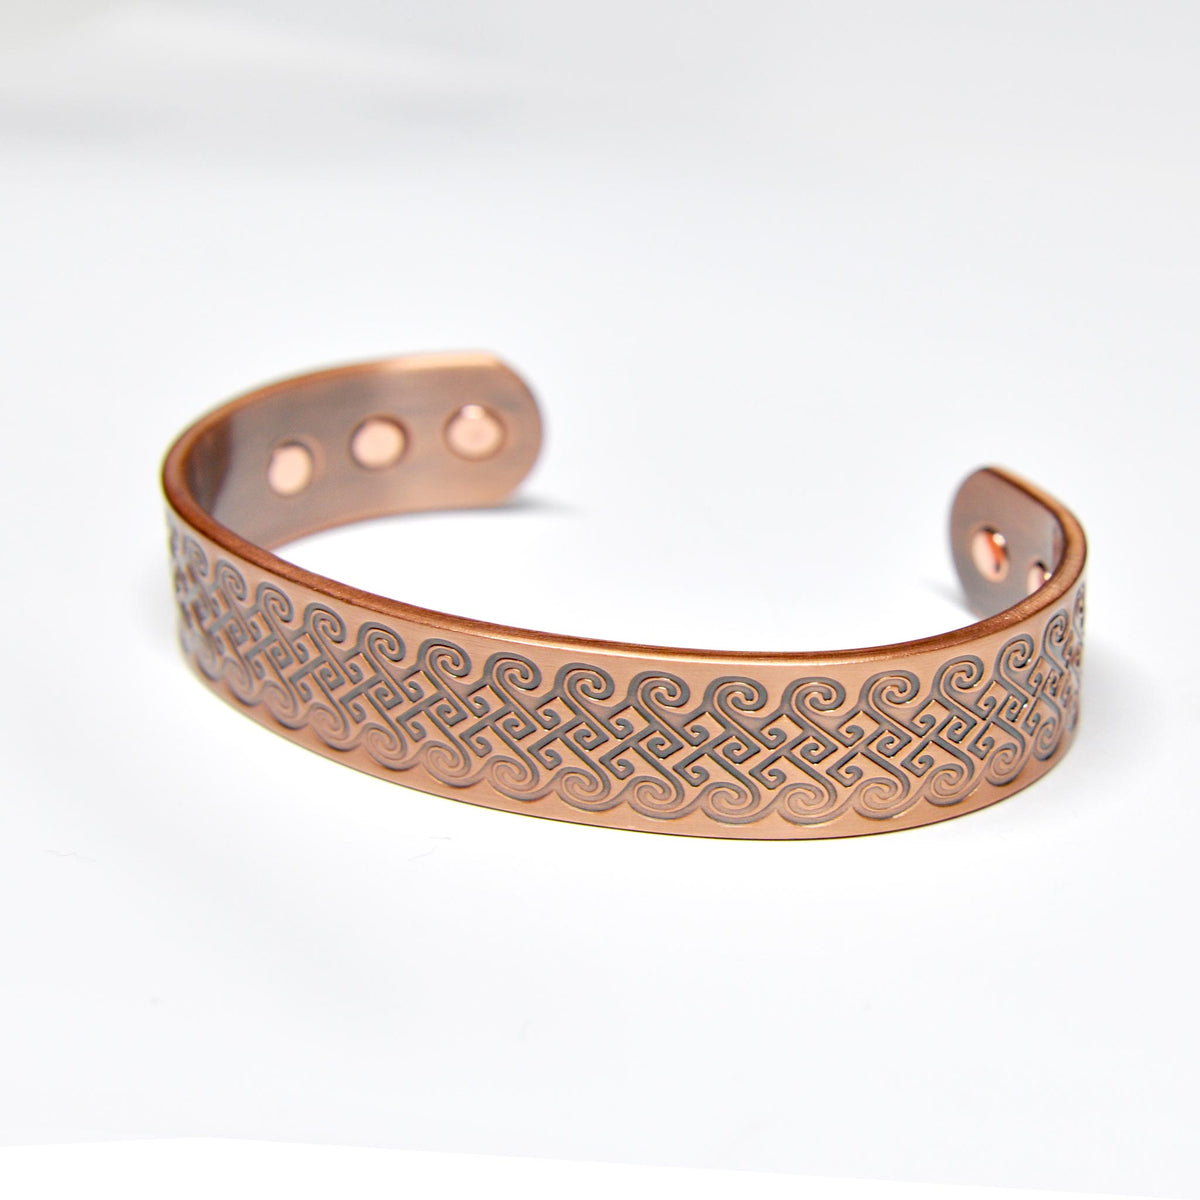 Copper Bracelet Meaning  Benefits of Wearing it in Astrology  Rudra  Centre